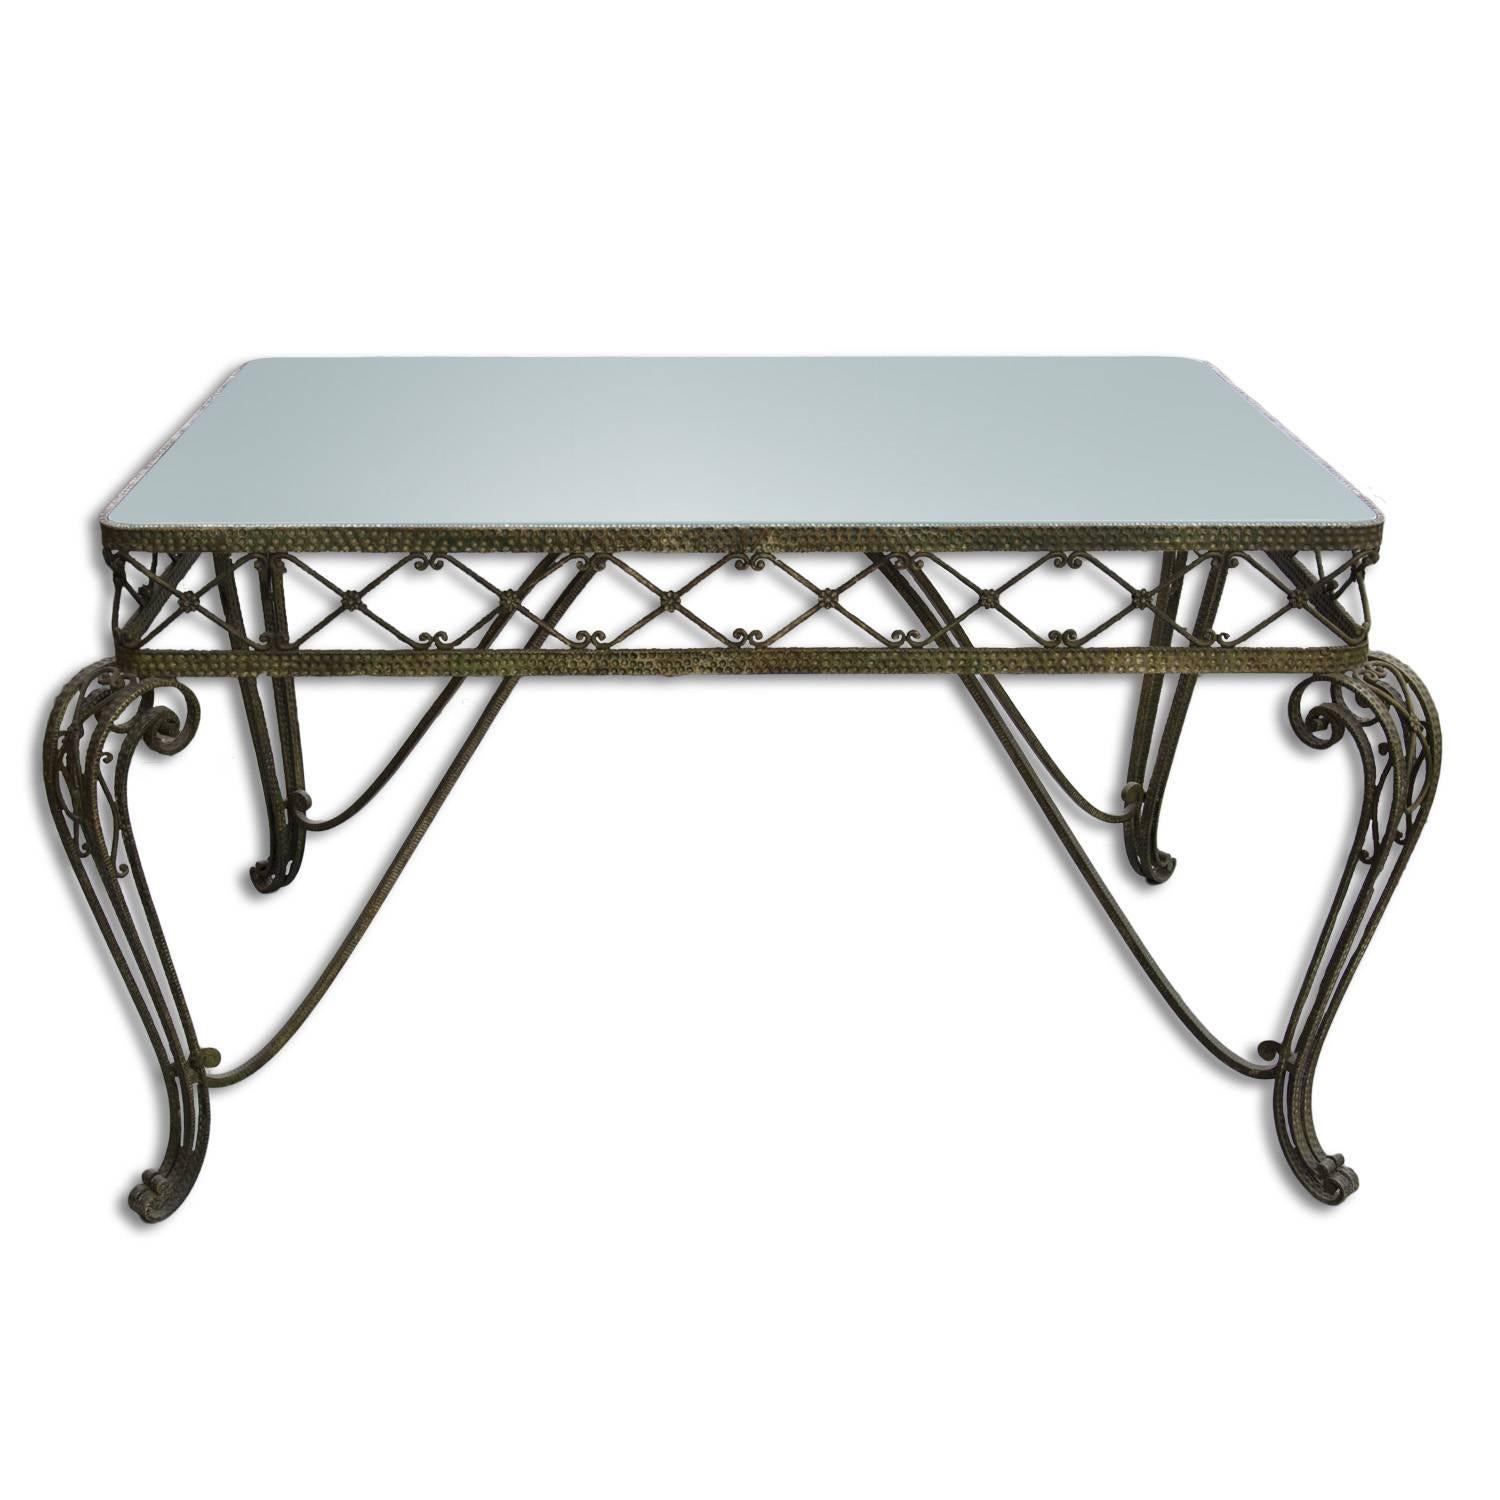 This large massive Regency style table was made in Italy in the 1950s. Designed by Pier Luigi Colli. The table features a light green glass plate and a brass structure with decorative motifs typical of this style and period.